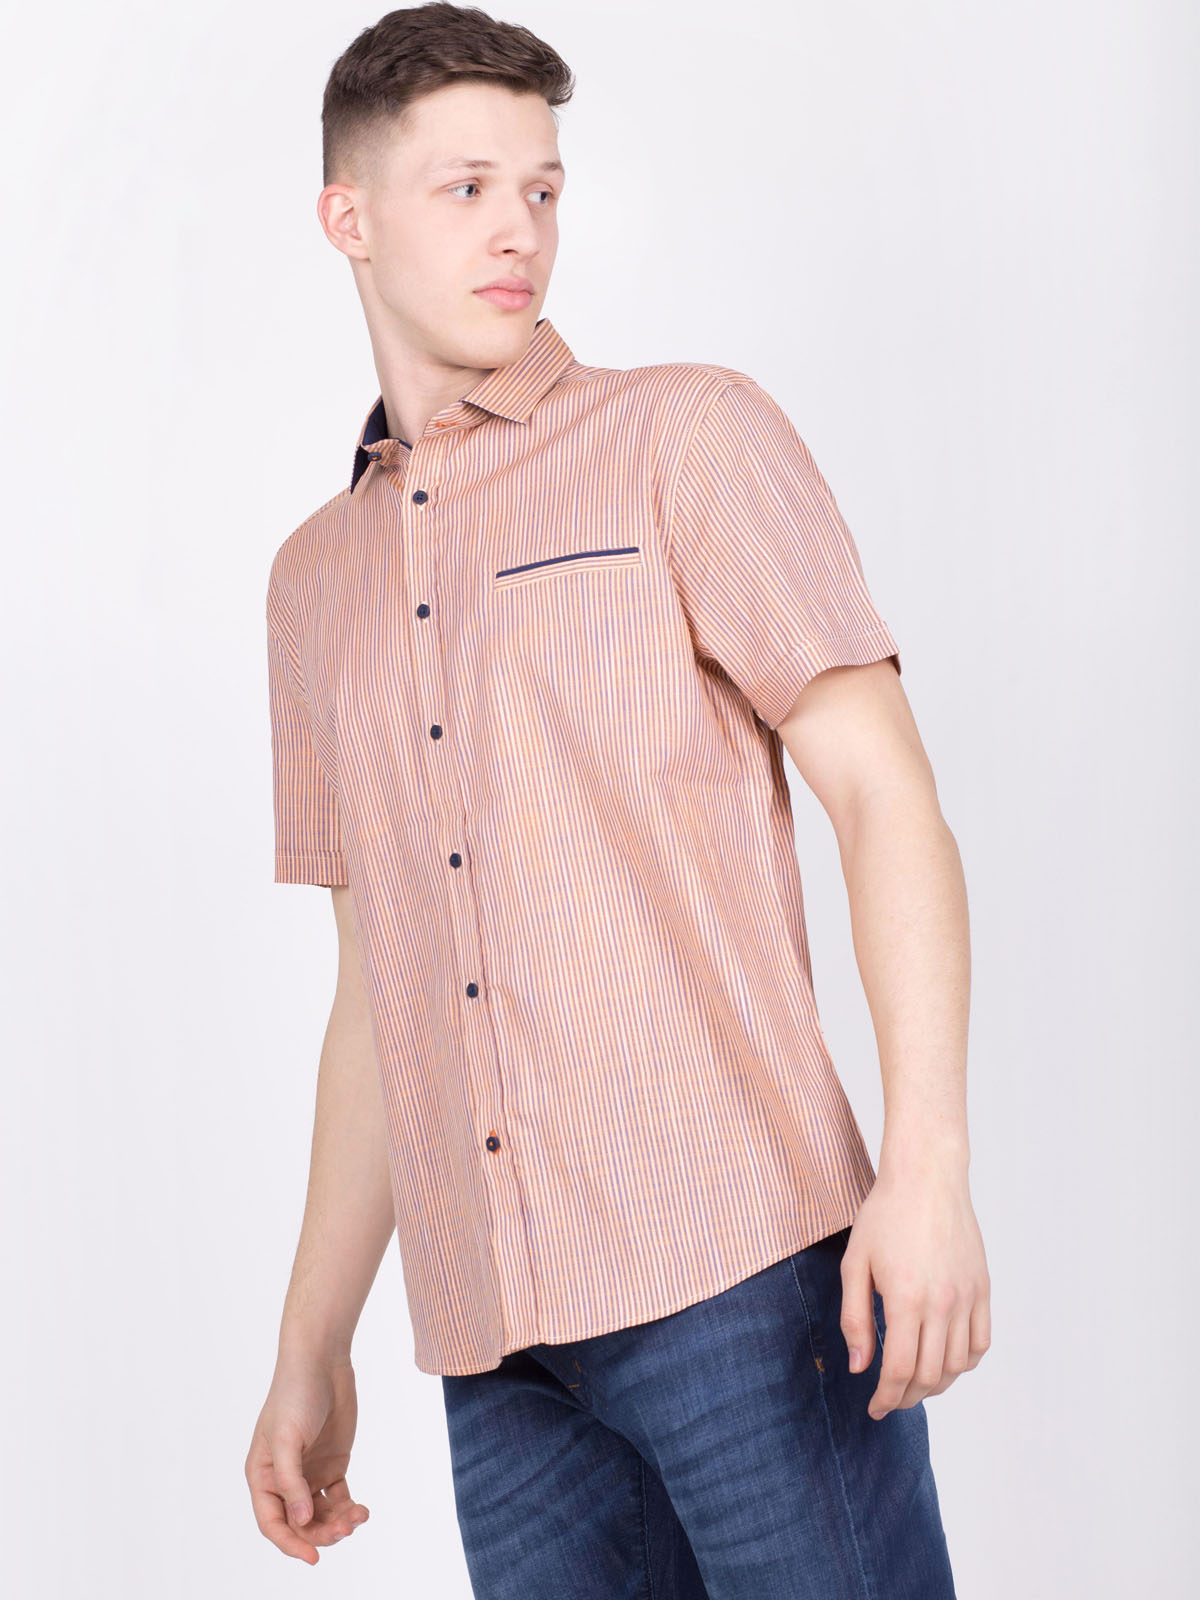 Shirt with linen in orange on blue stri - 80211 € 21.93 img2